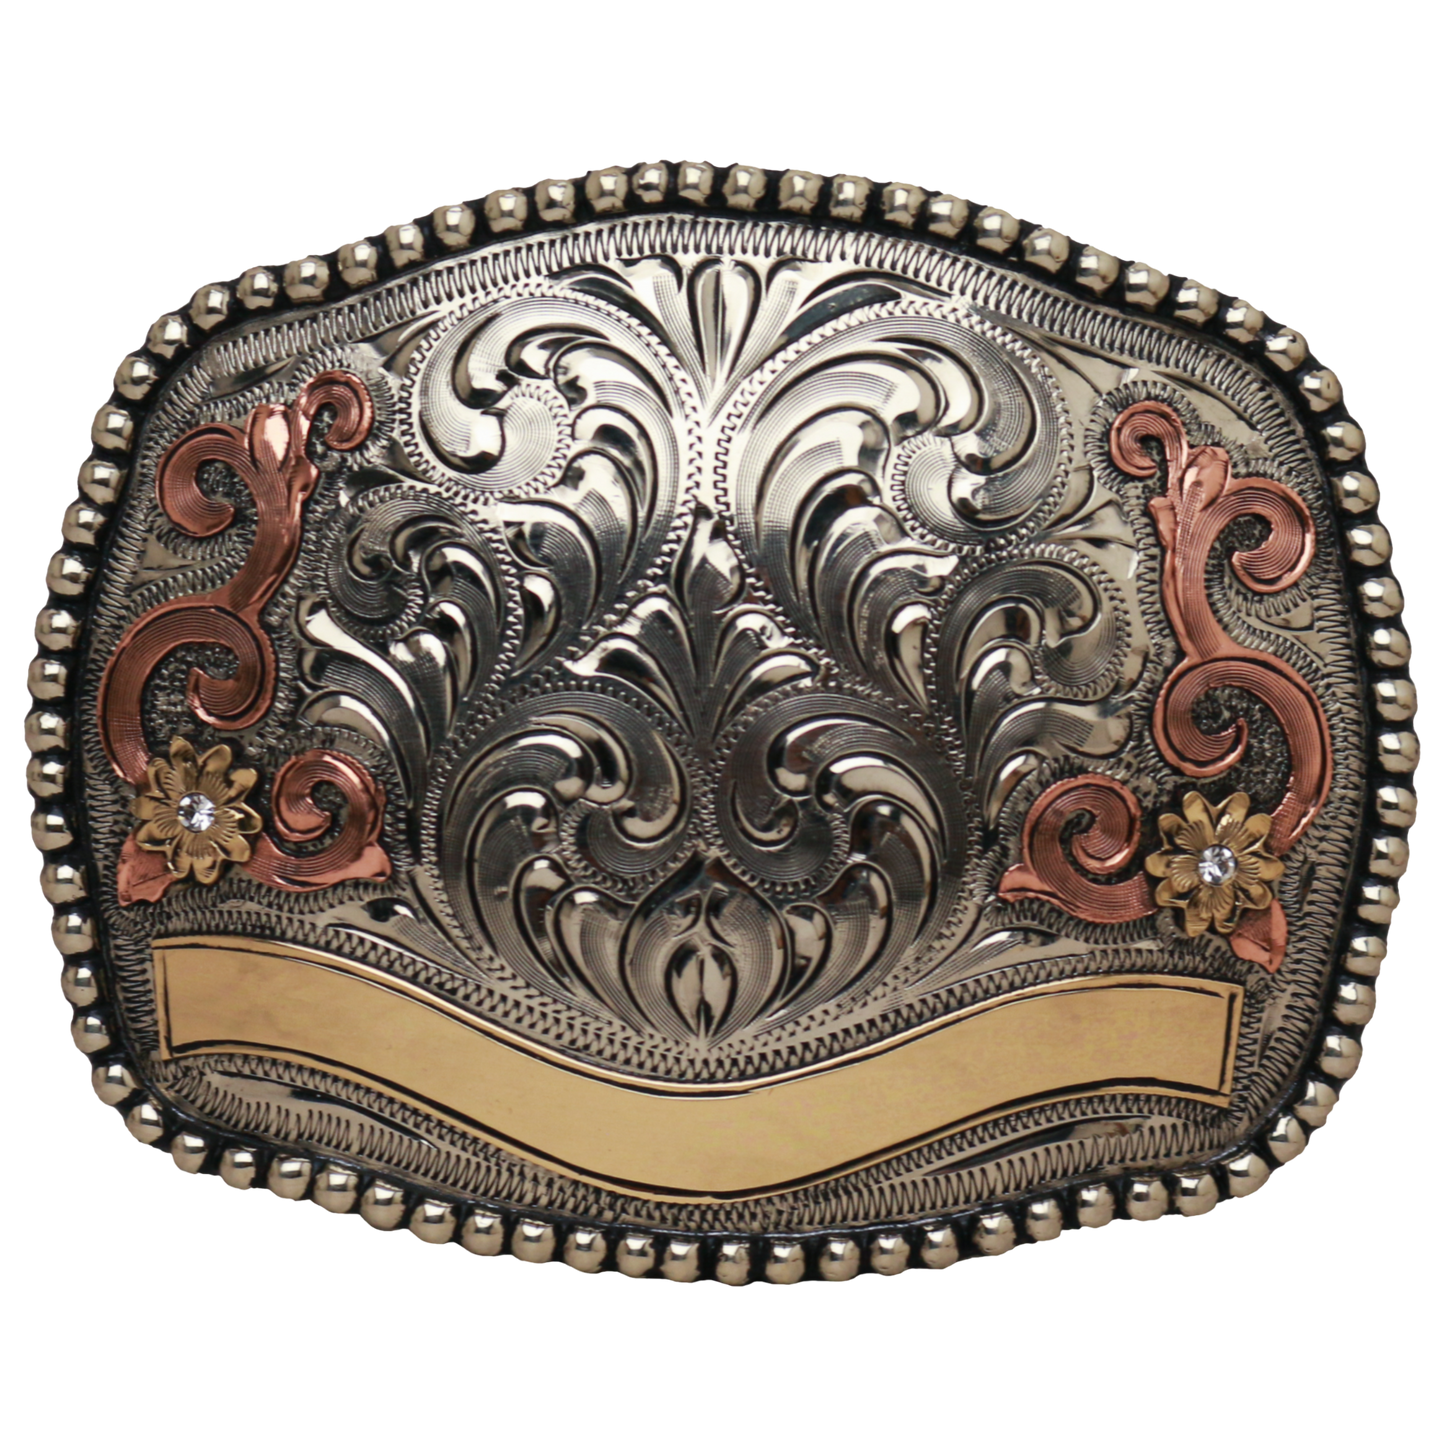 Performance Buckle - Style 17